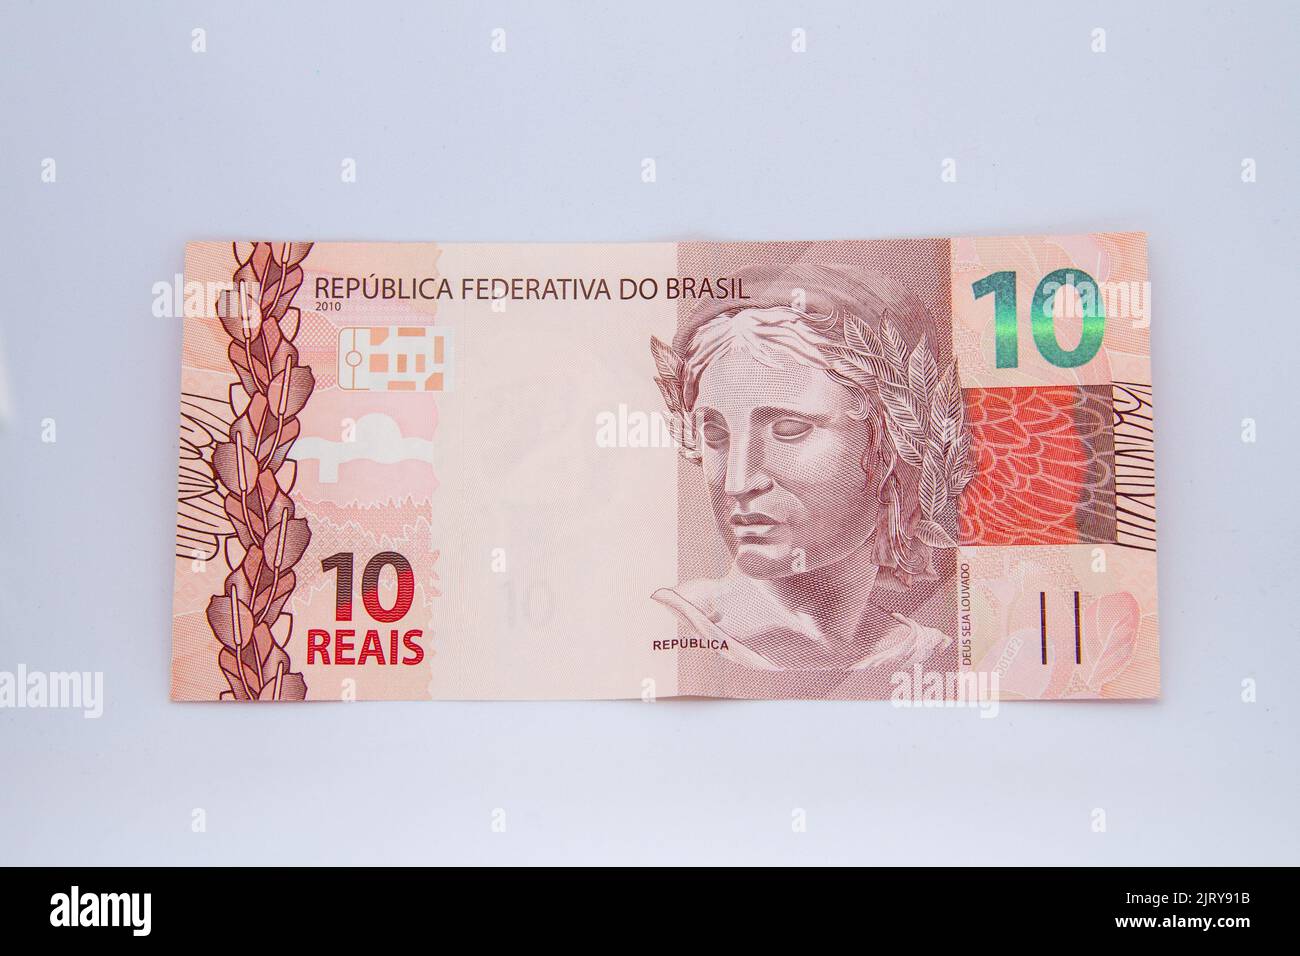 ten reais banknote (Brazilian currency) on a white background in Brazil Stock Photo